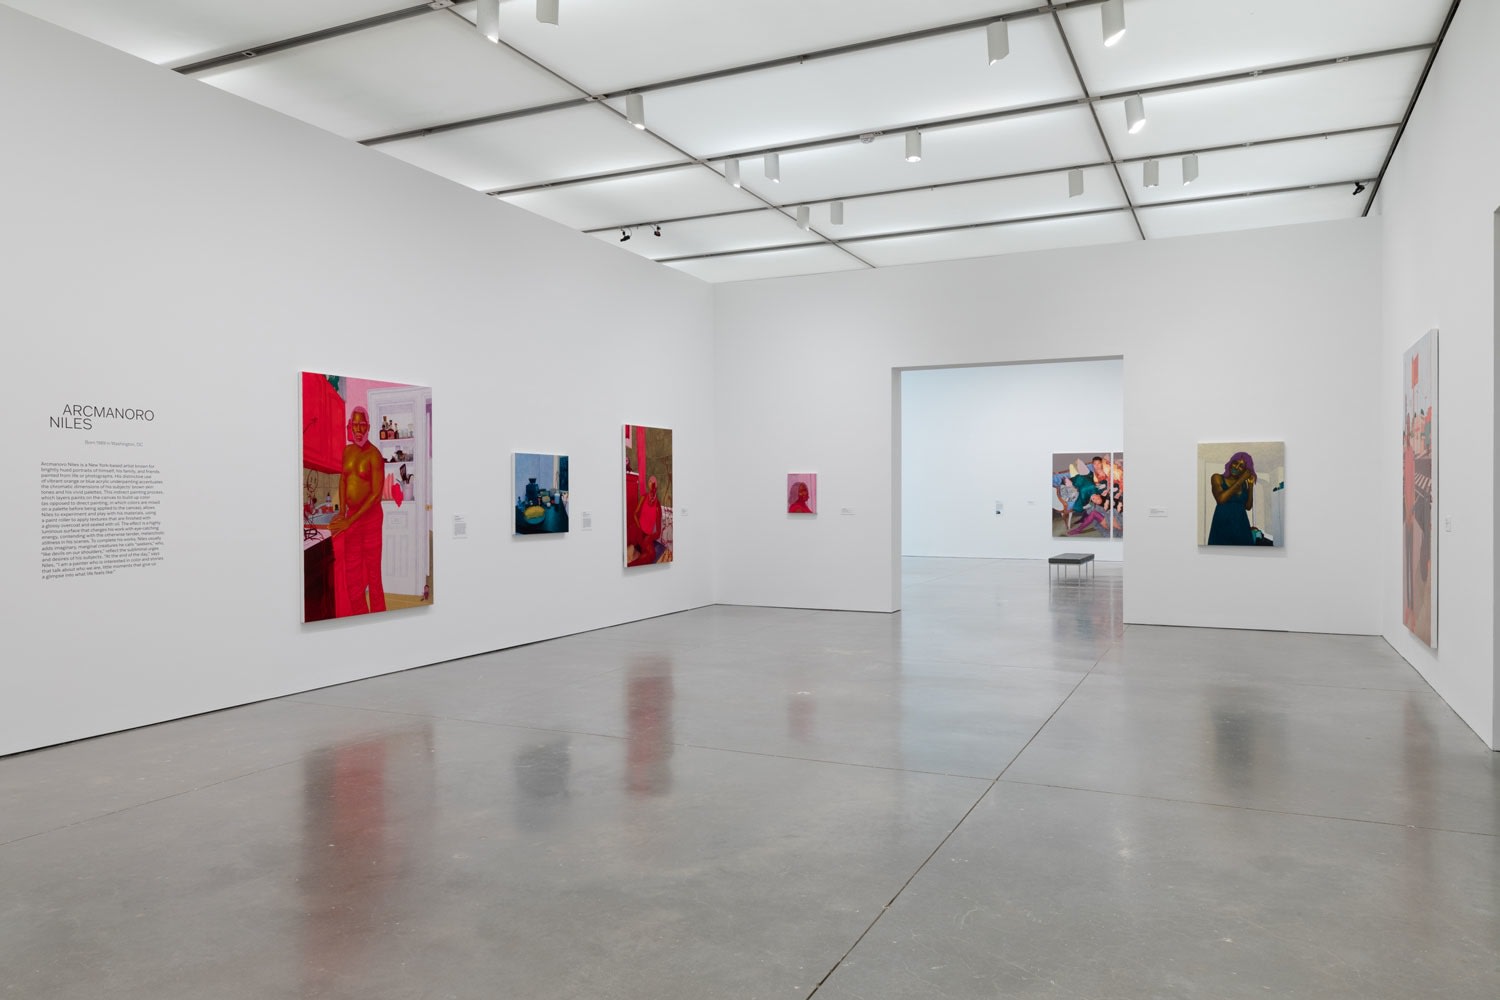 A Place for Me: Figurative Painting Now, Institute of Contemporary Art/Boston, Boston, MA